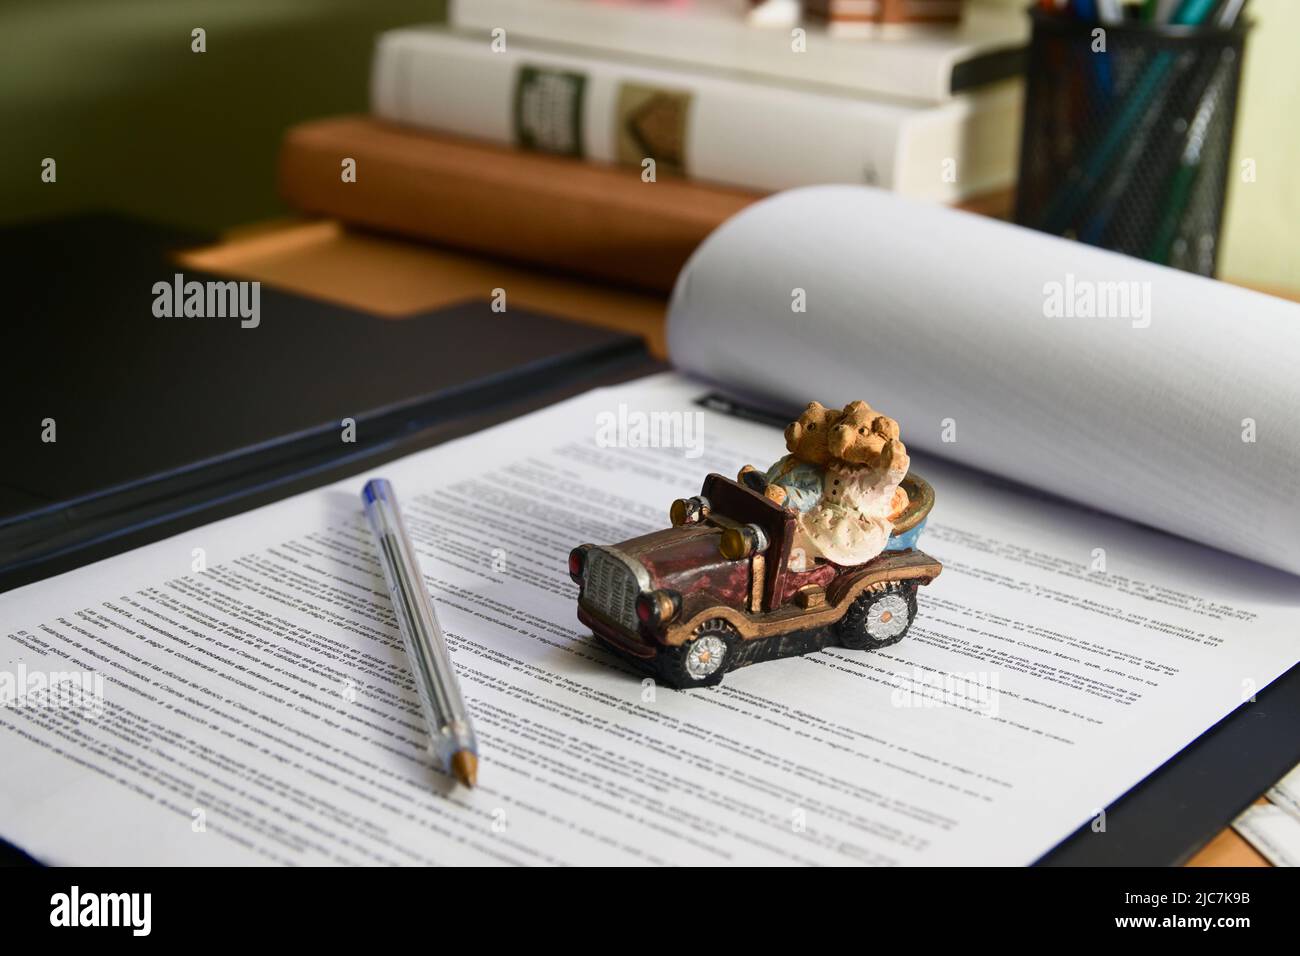 Image of a stroller on a car purchase agreement on a table in an office, with out-of-focus books in the background Stock Photo